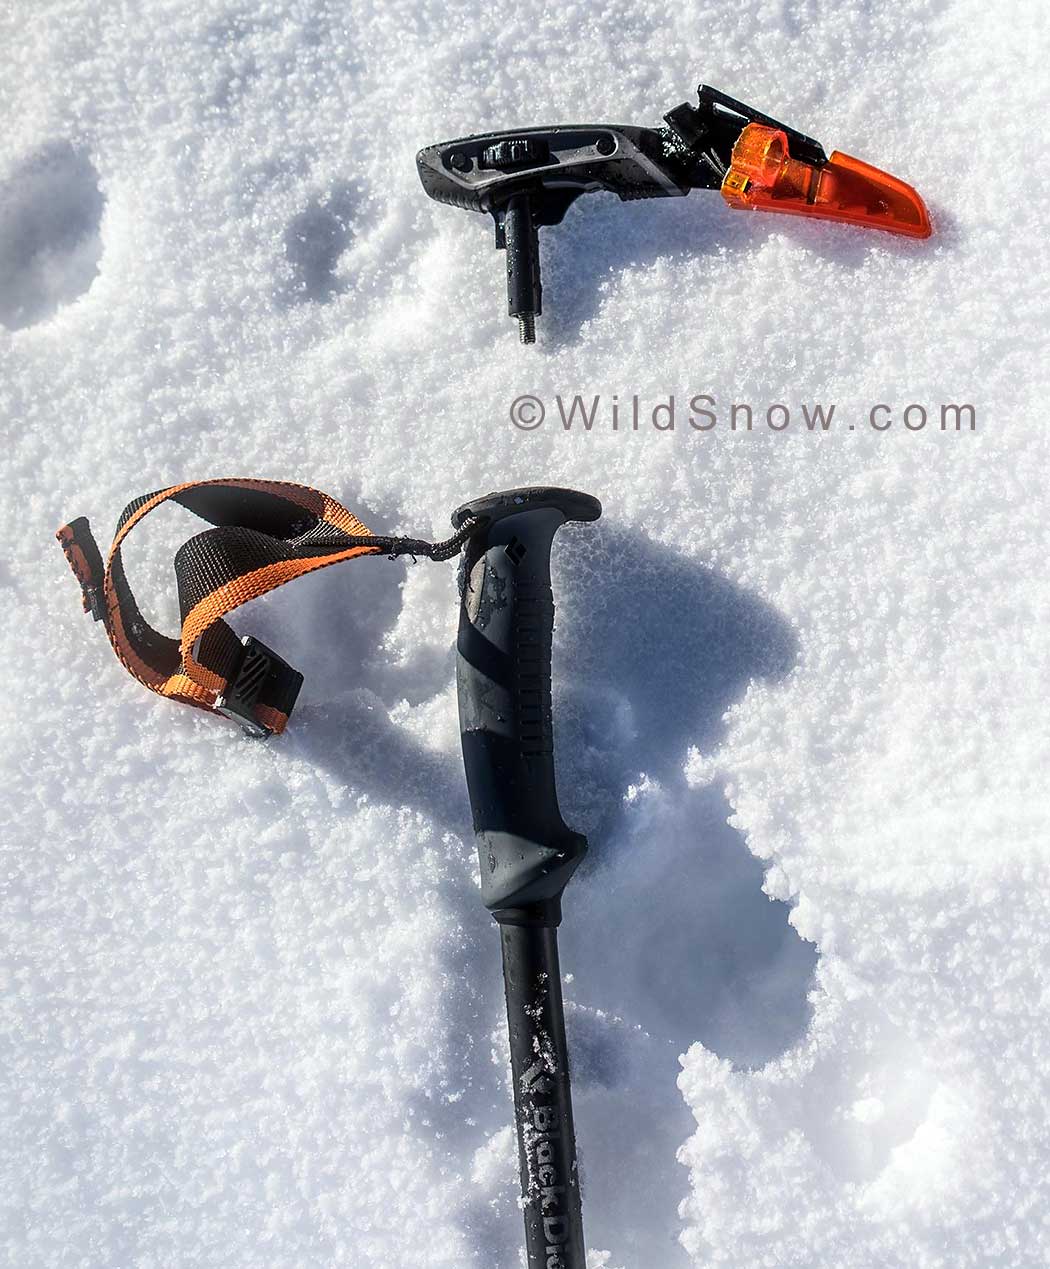 2018 Black Diamond Removable Whippet: First Look - The Backcountry